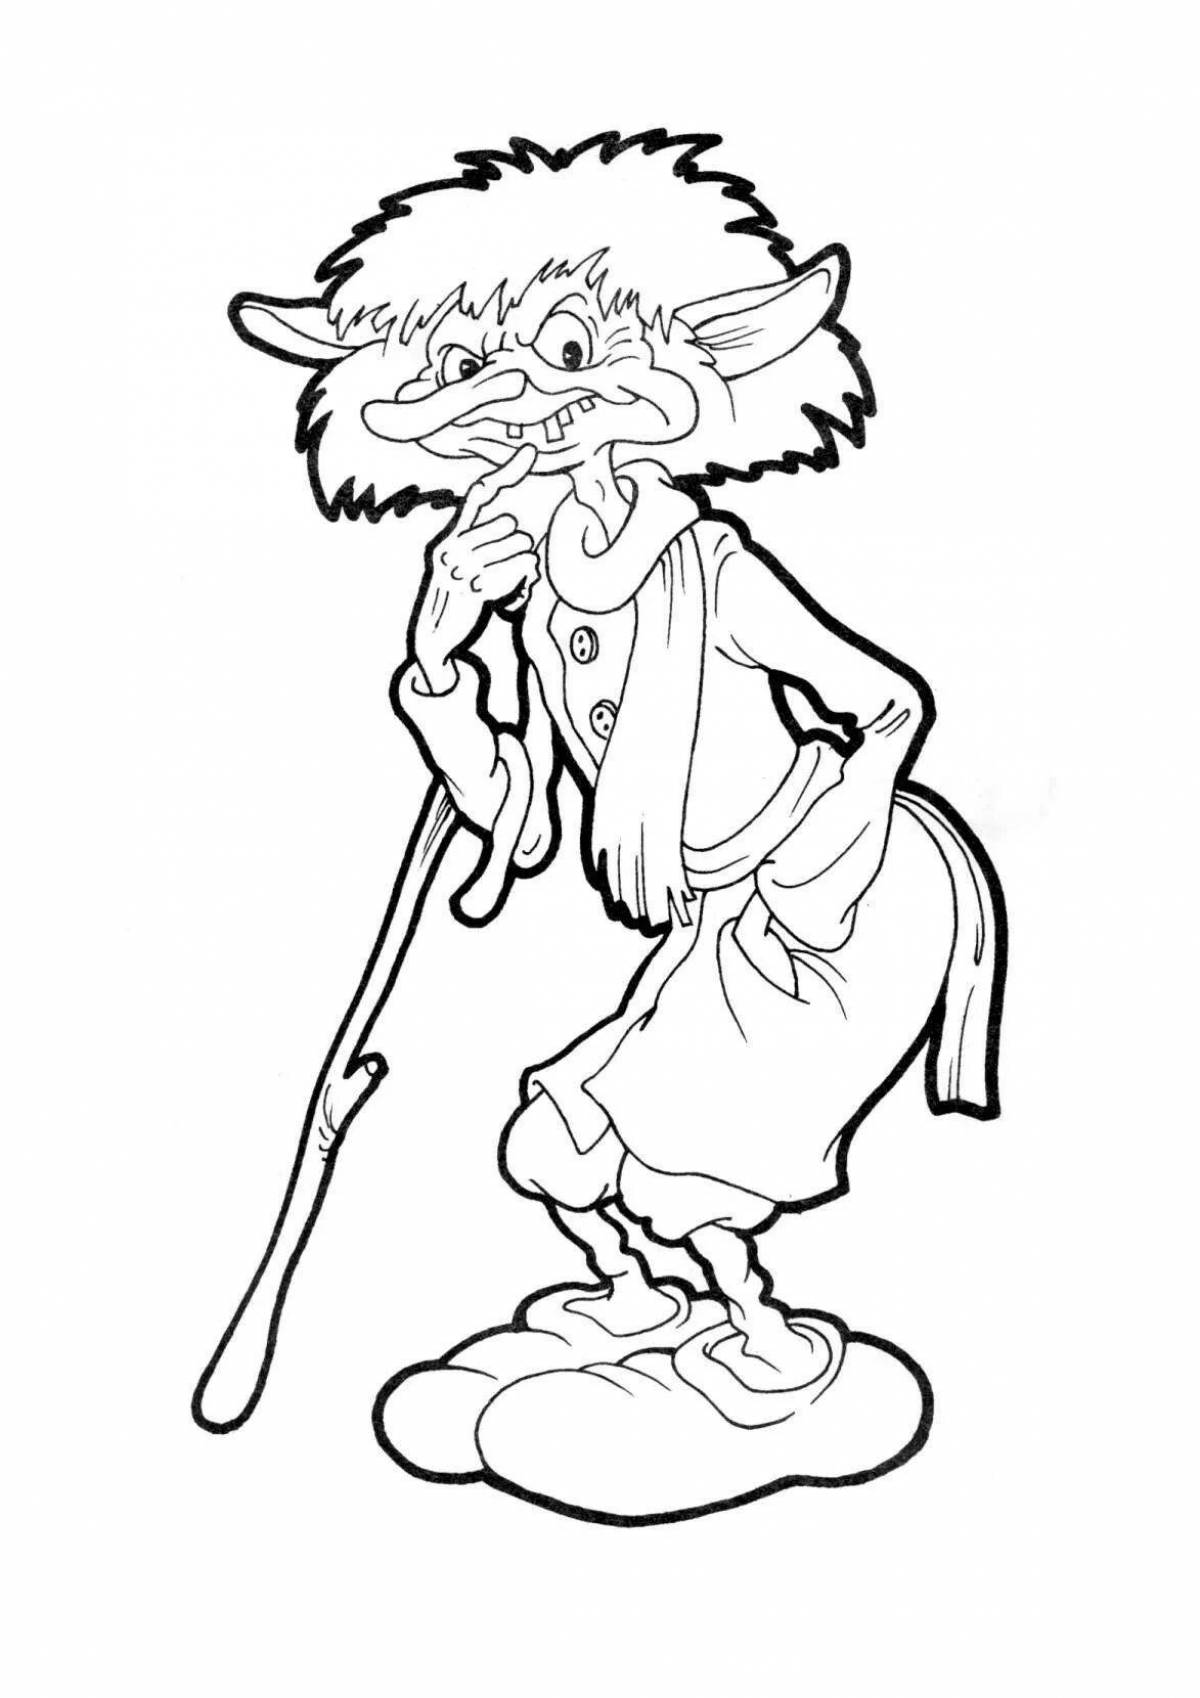 Animated goblin coloring page for students